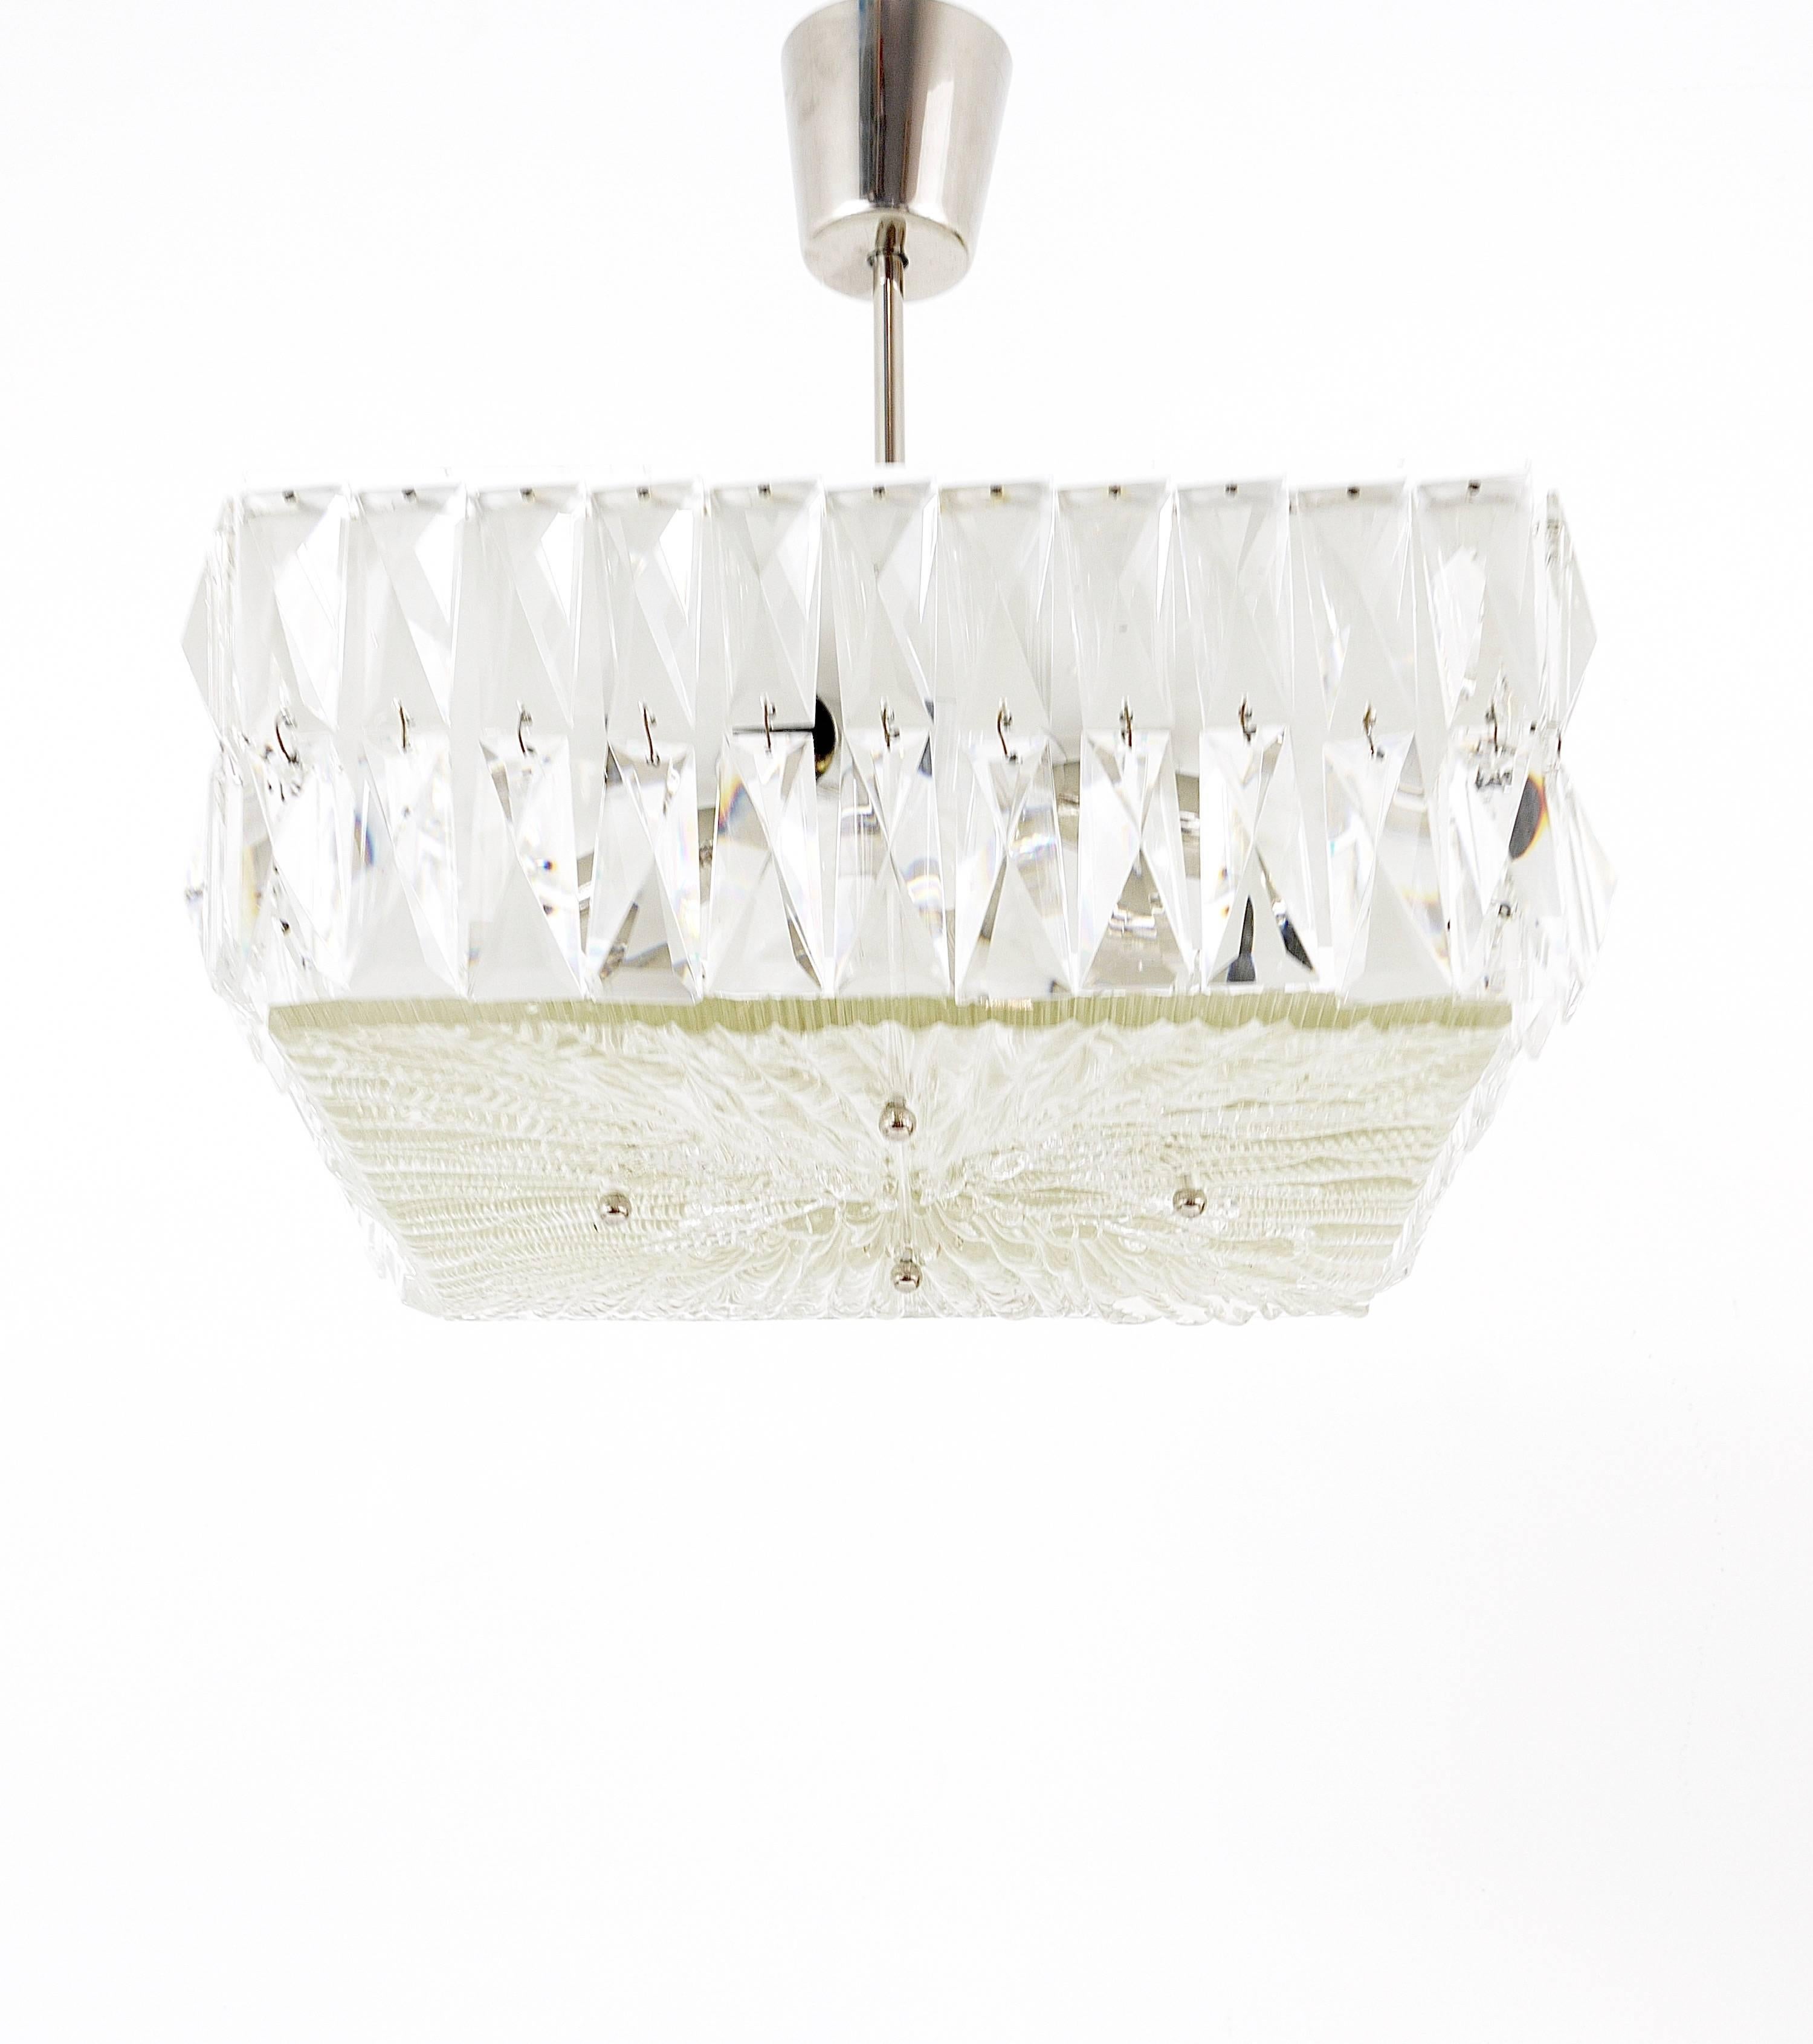 A square Mid-Century pendant lamp from the 1960s, handcrafted by Bakalowits Vienna in Austria. A beautiful piece, white and nickel-plated metal hardware surrounded by two rows of square faceted crystals. The addition of a textured glass diffuser